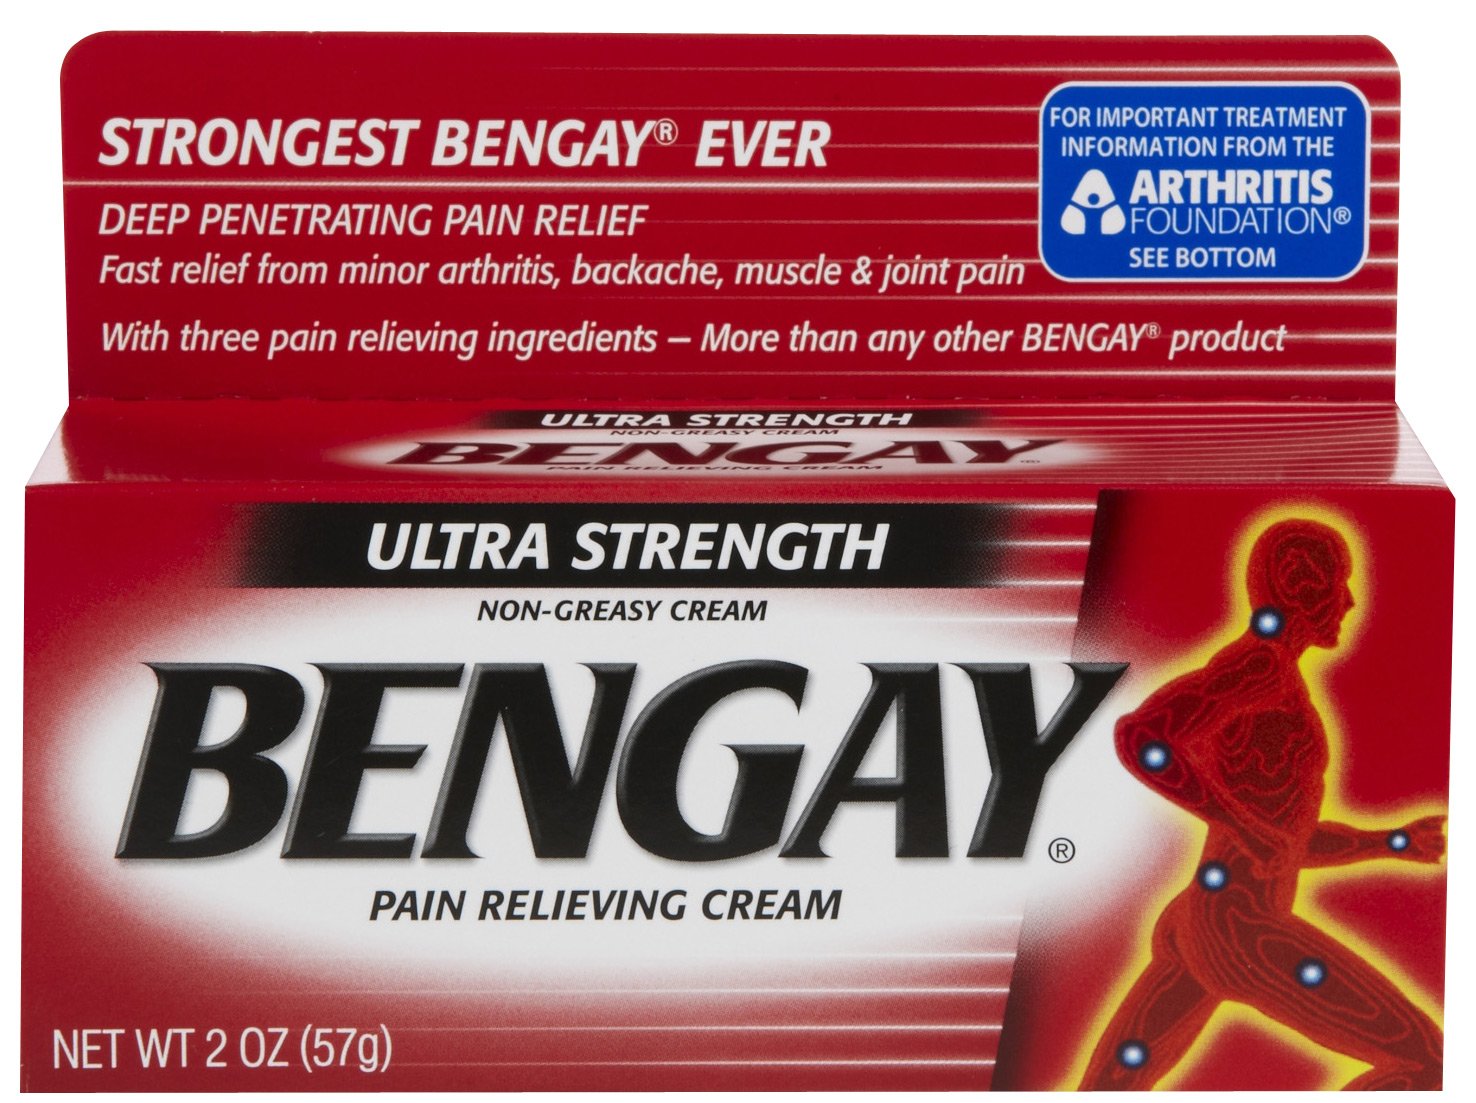 Ben-gay Pics, Products Collection